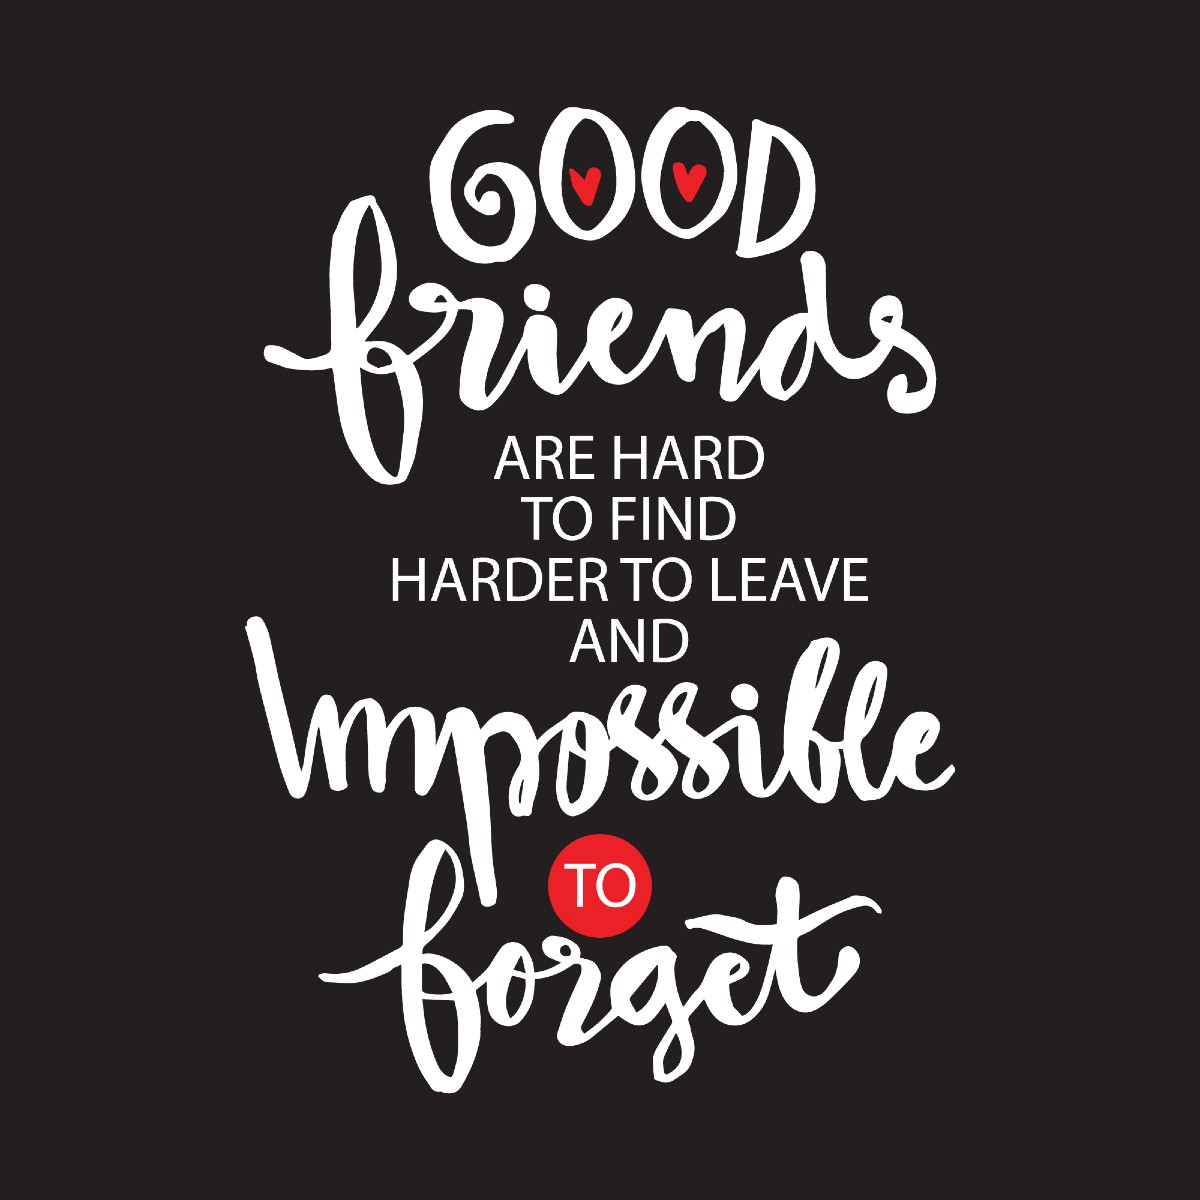 Happy Friendship Day 2021: Images, Wishes, Quotes, Messages and